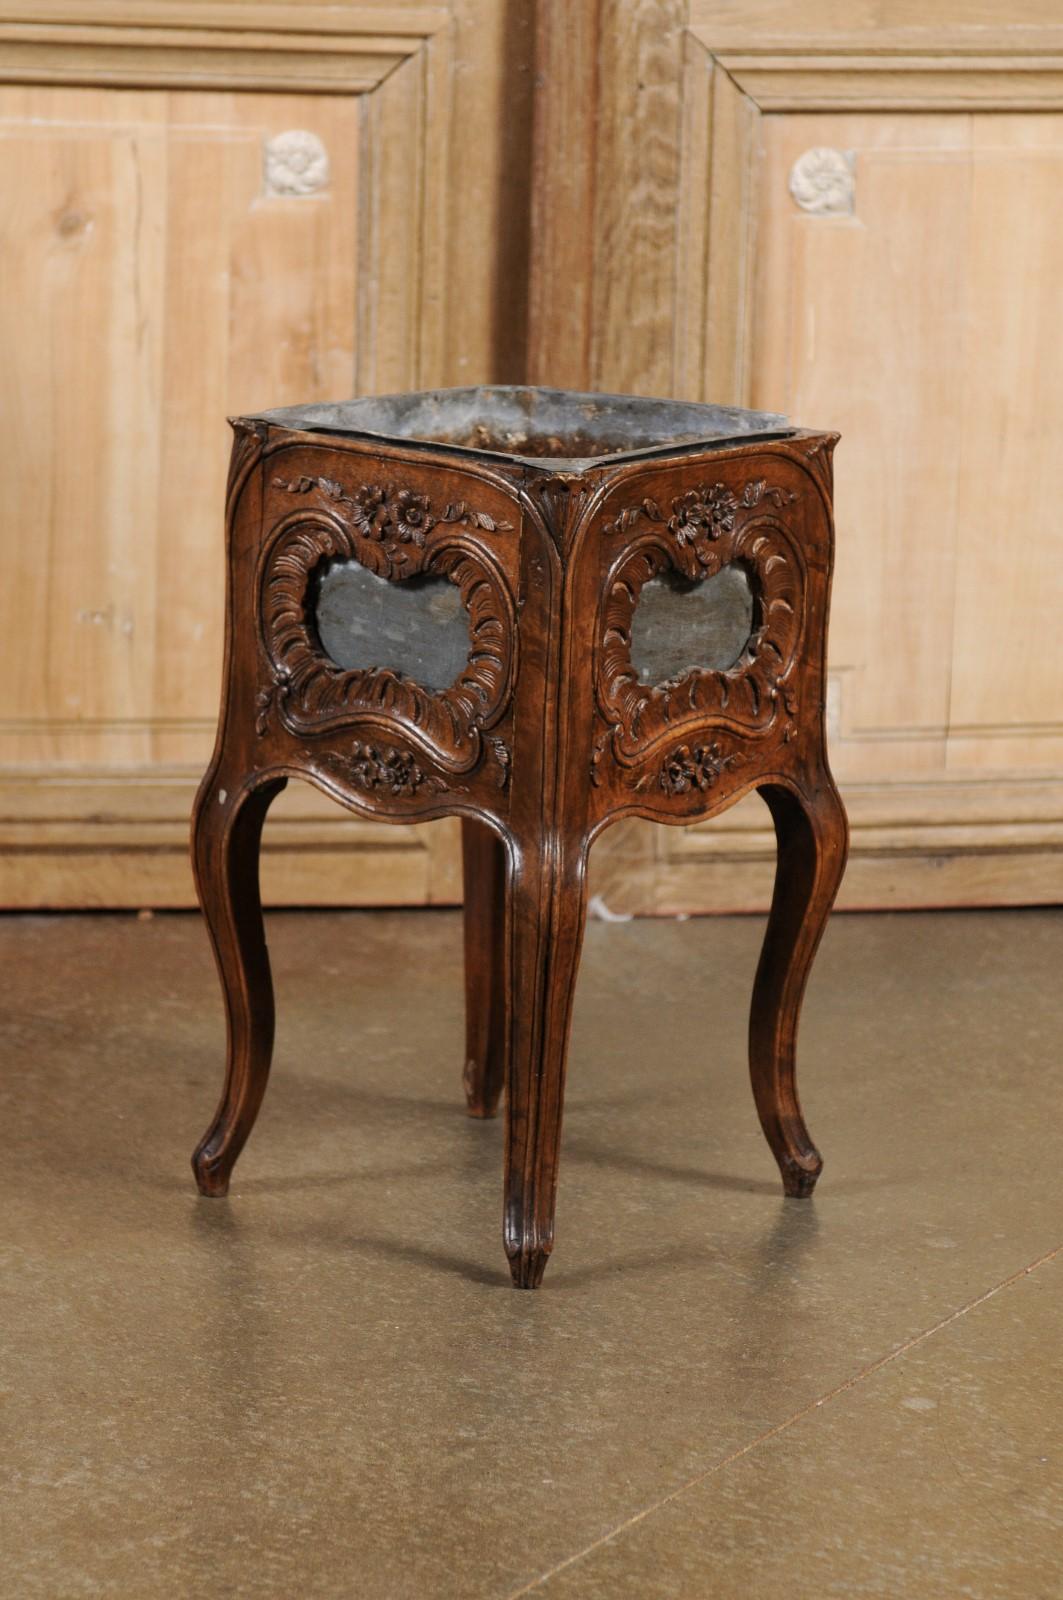 French 1890s Rococo Revival Walnut Planter with Rocailles and Floral Motifs For Sale 3